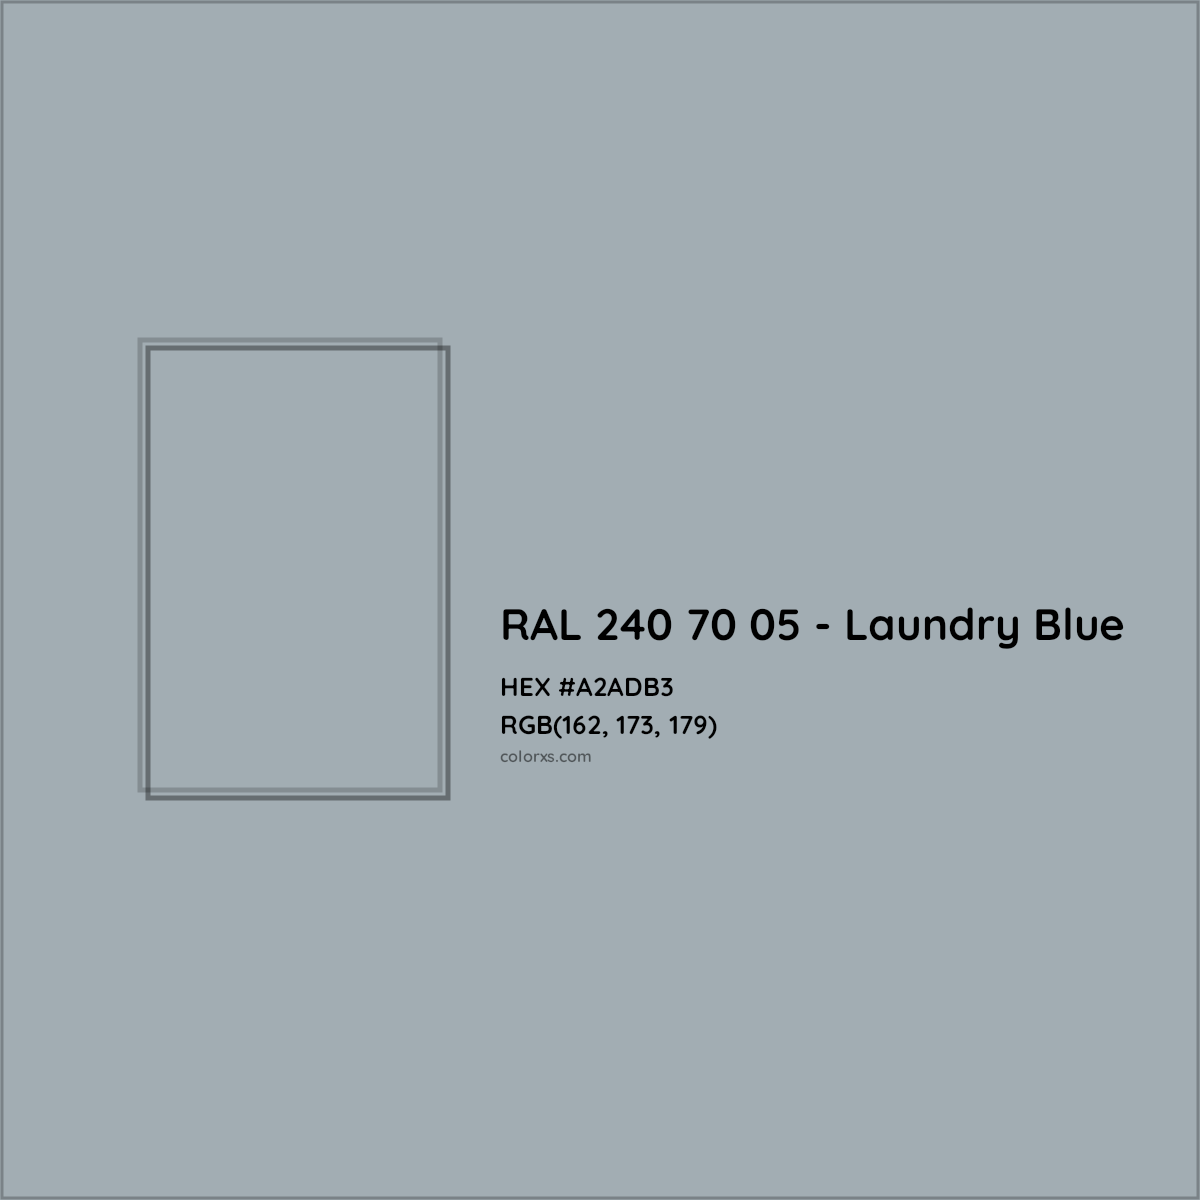 HEX #A2ADB3 RAL 240 70 05 - Laundry Blue CMS RAL Design - Color Code